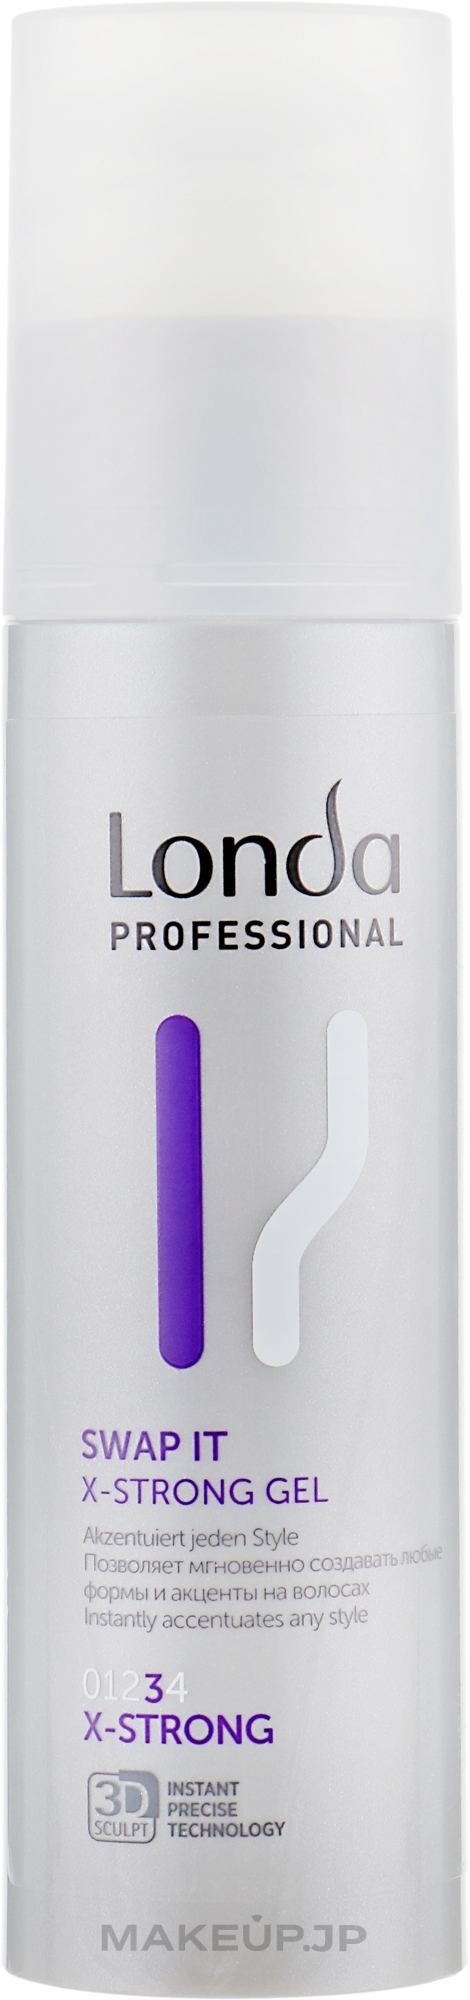 Extra Strong Hold Styling Hair Gel - Londa Professional Swap It X-Strong Gel — photo 100 ml